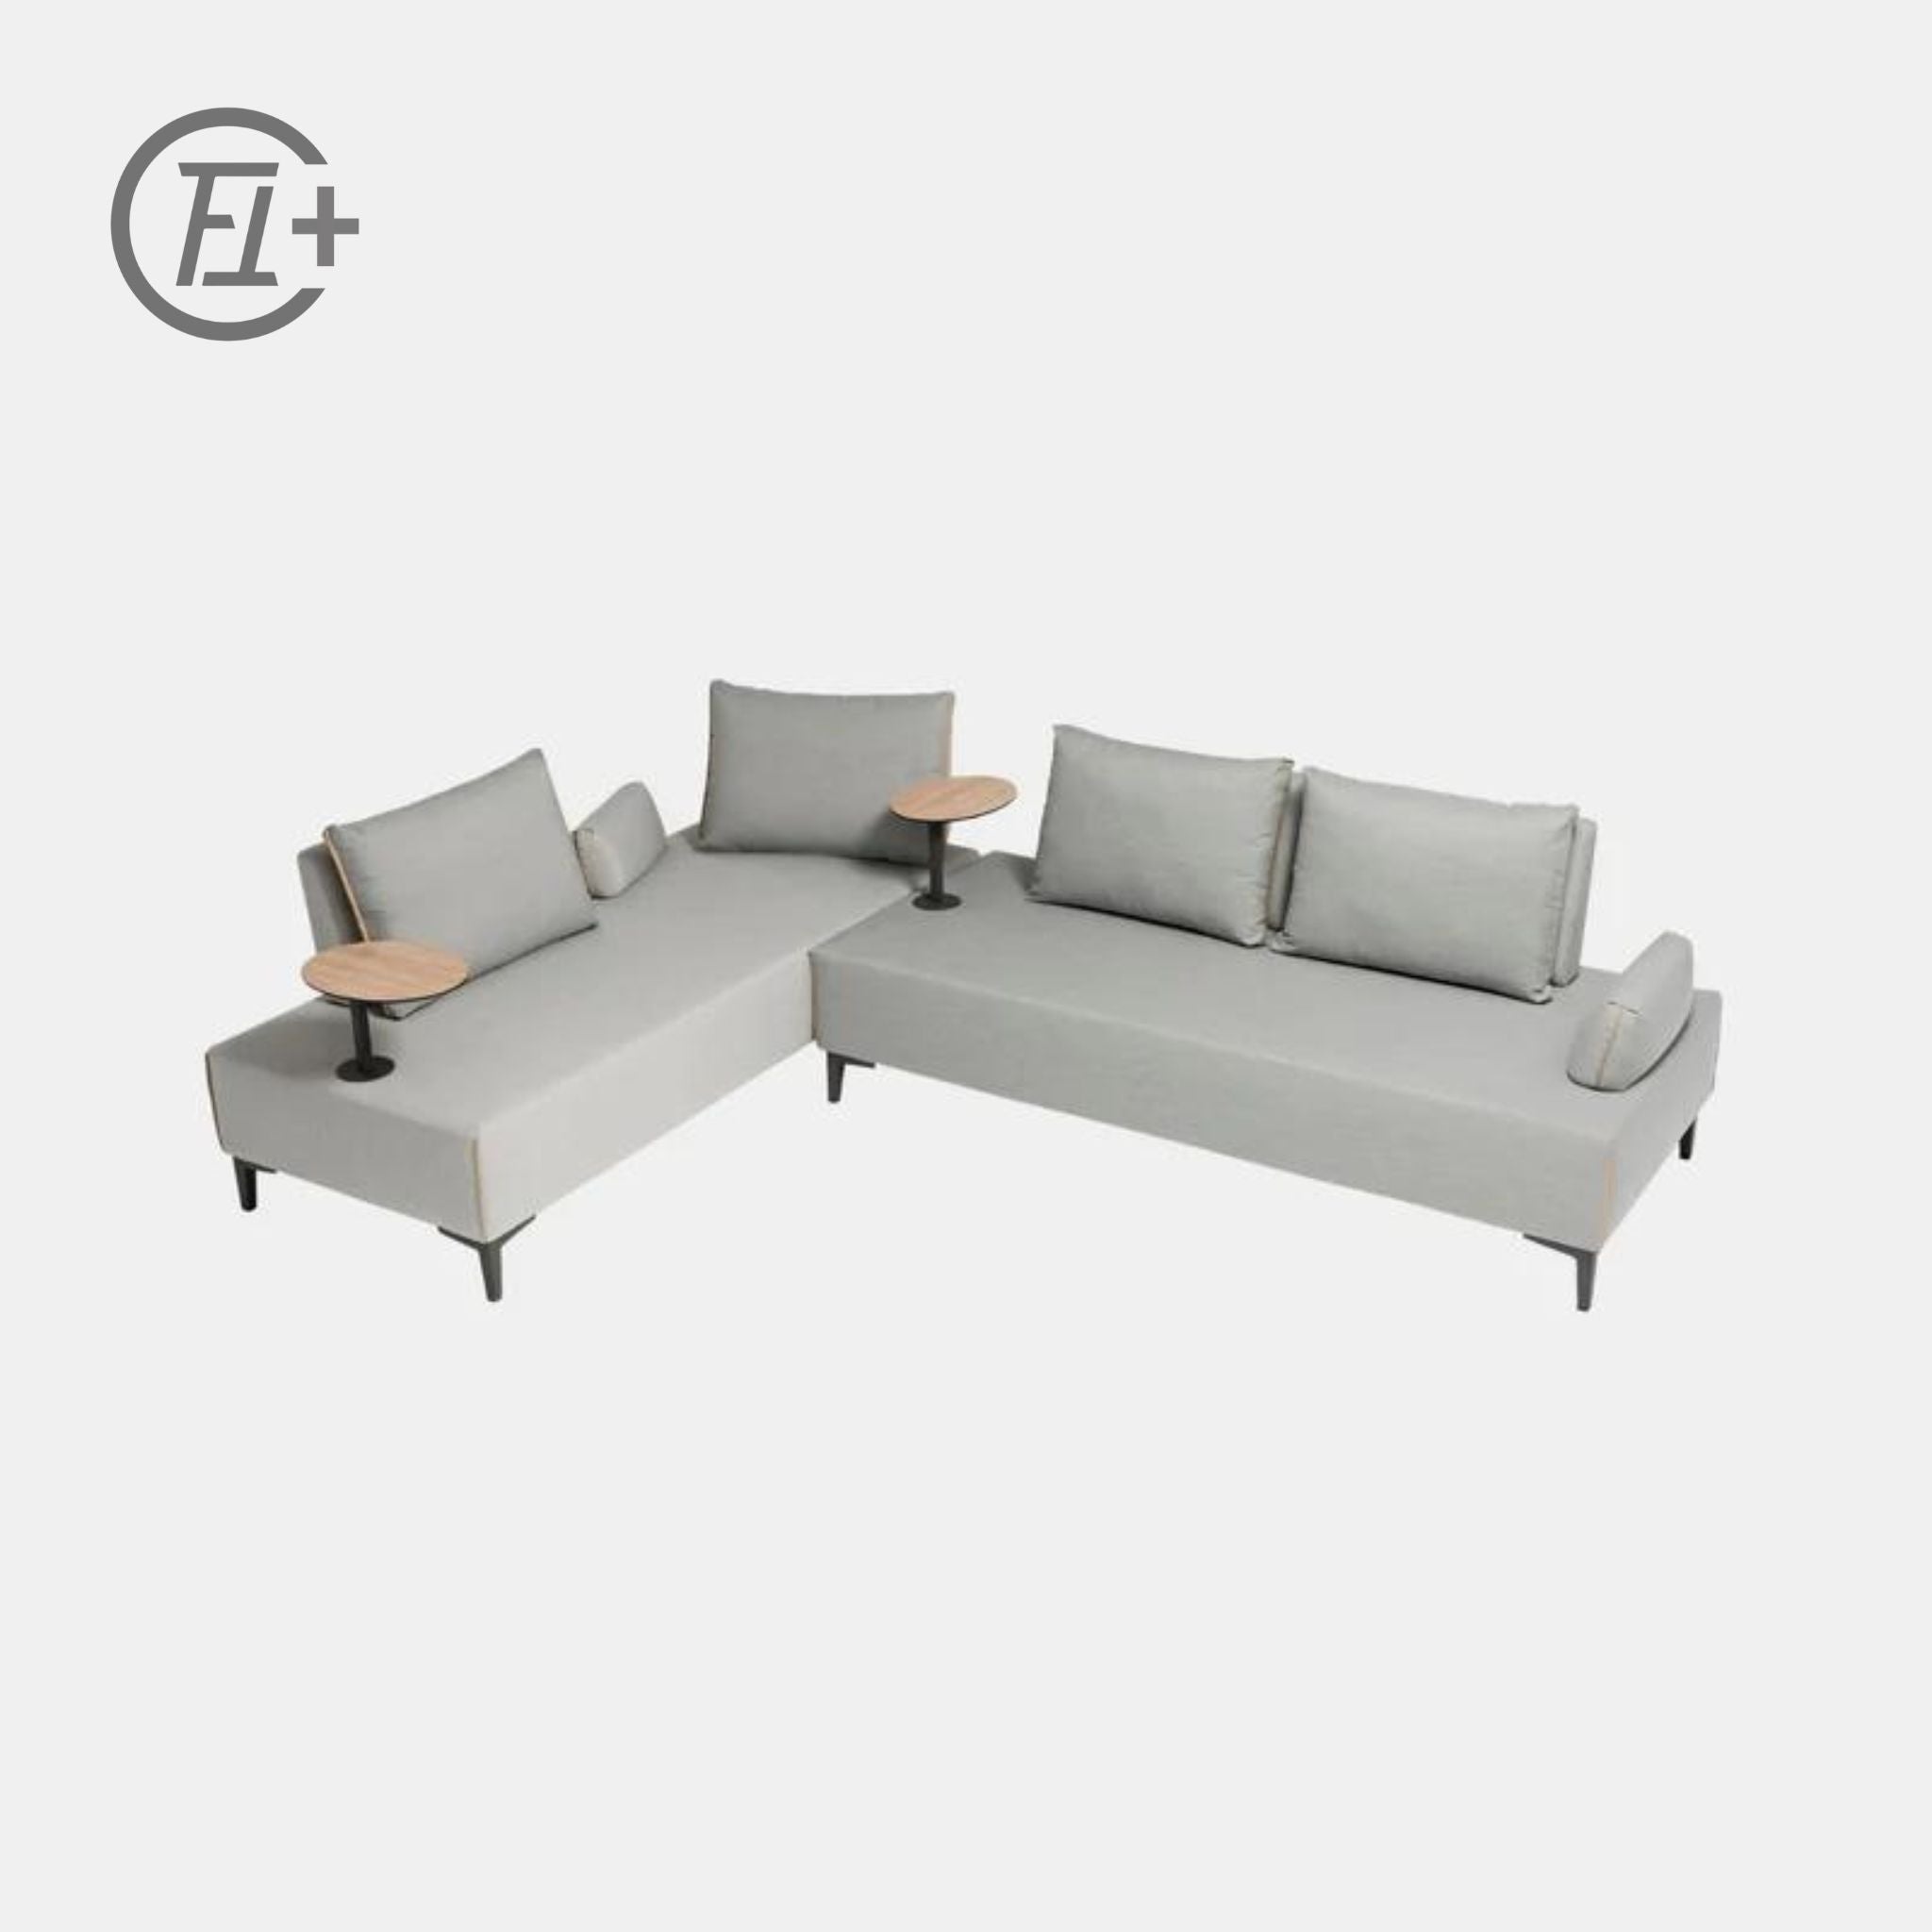 Flexi Series | Outdoor Lounge Set - The Feelter